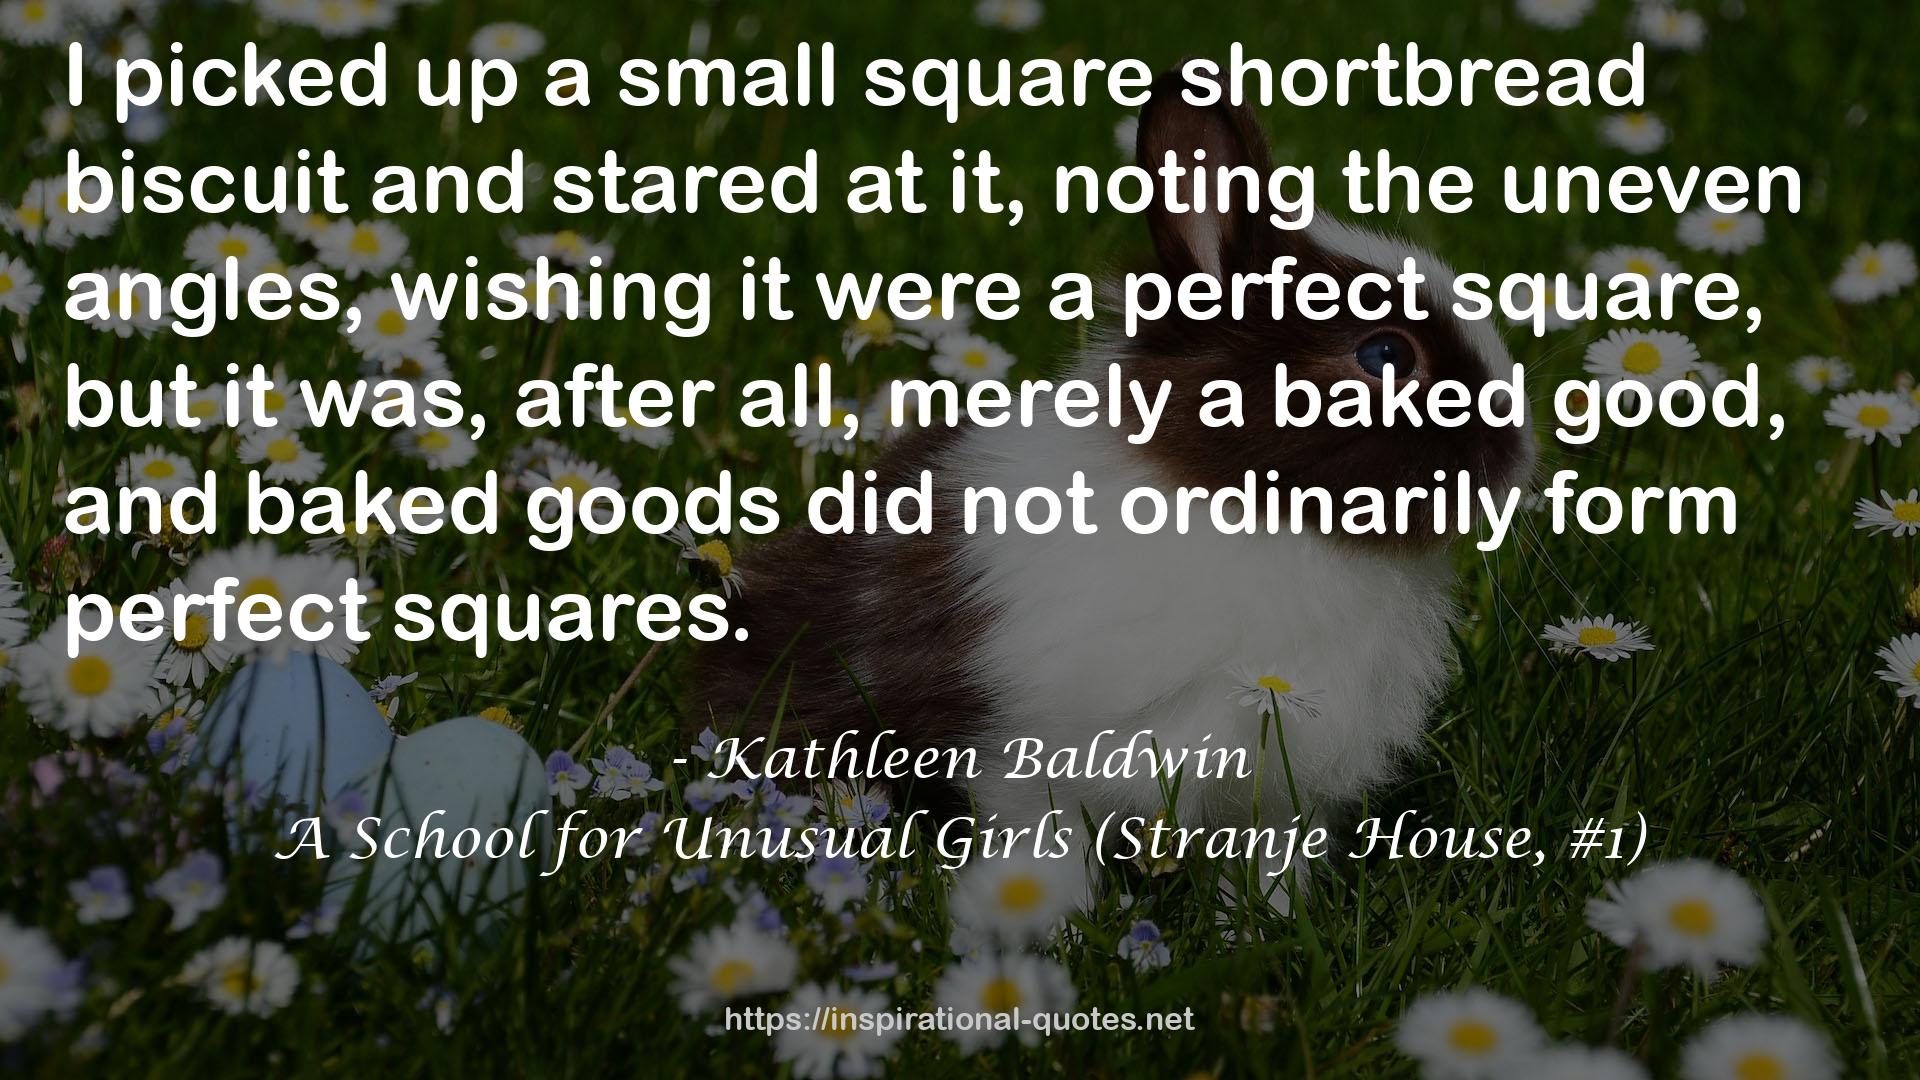 A School for Unusual Girls (Stranje House, #1) QUOTES